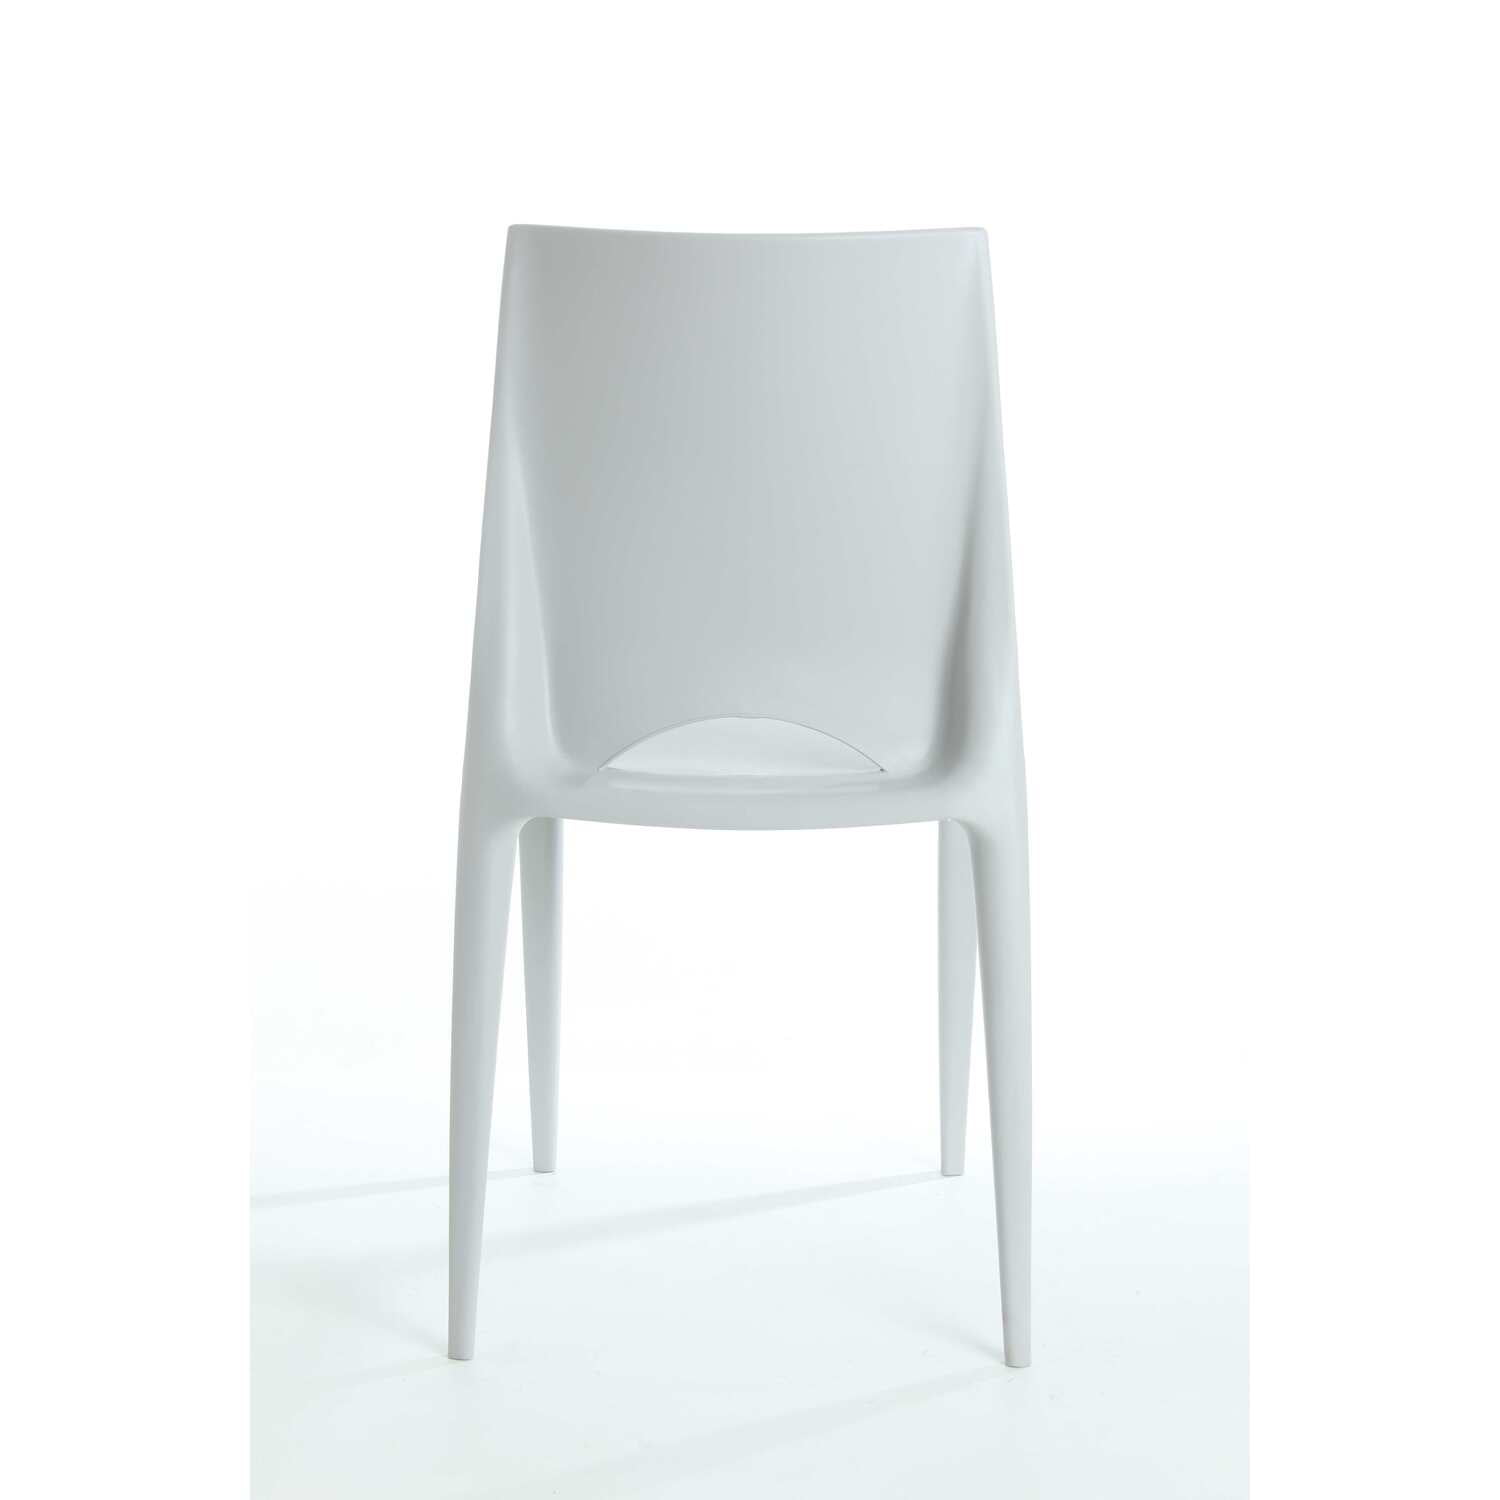 Rpp-crescent-lg Crescent Polyproplylene Stackable Chair - Light Grey - 32 In.